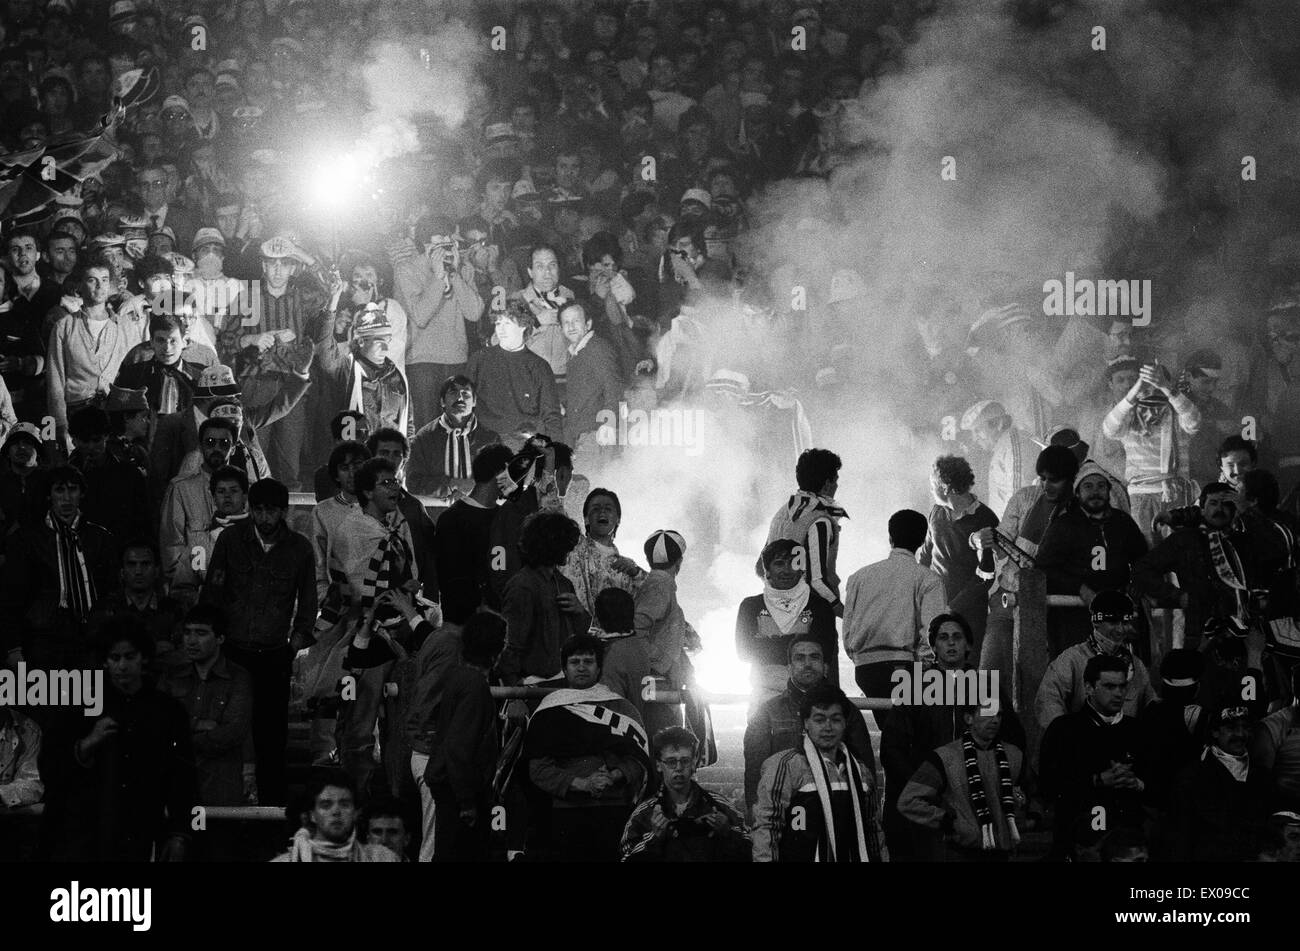 Juventus 1-0 Liverpool, 1985 European Cup Final, Heysel Stadium, Brussels, Wednesday 29th May 1985. Crowd Violence. Stock Photo